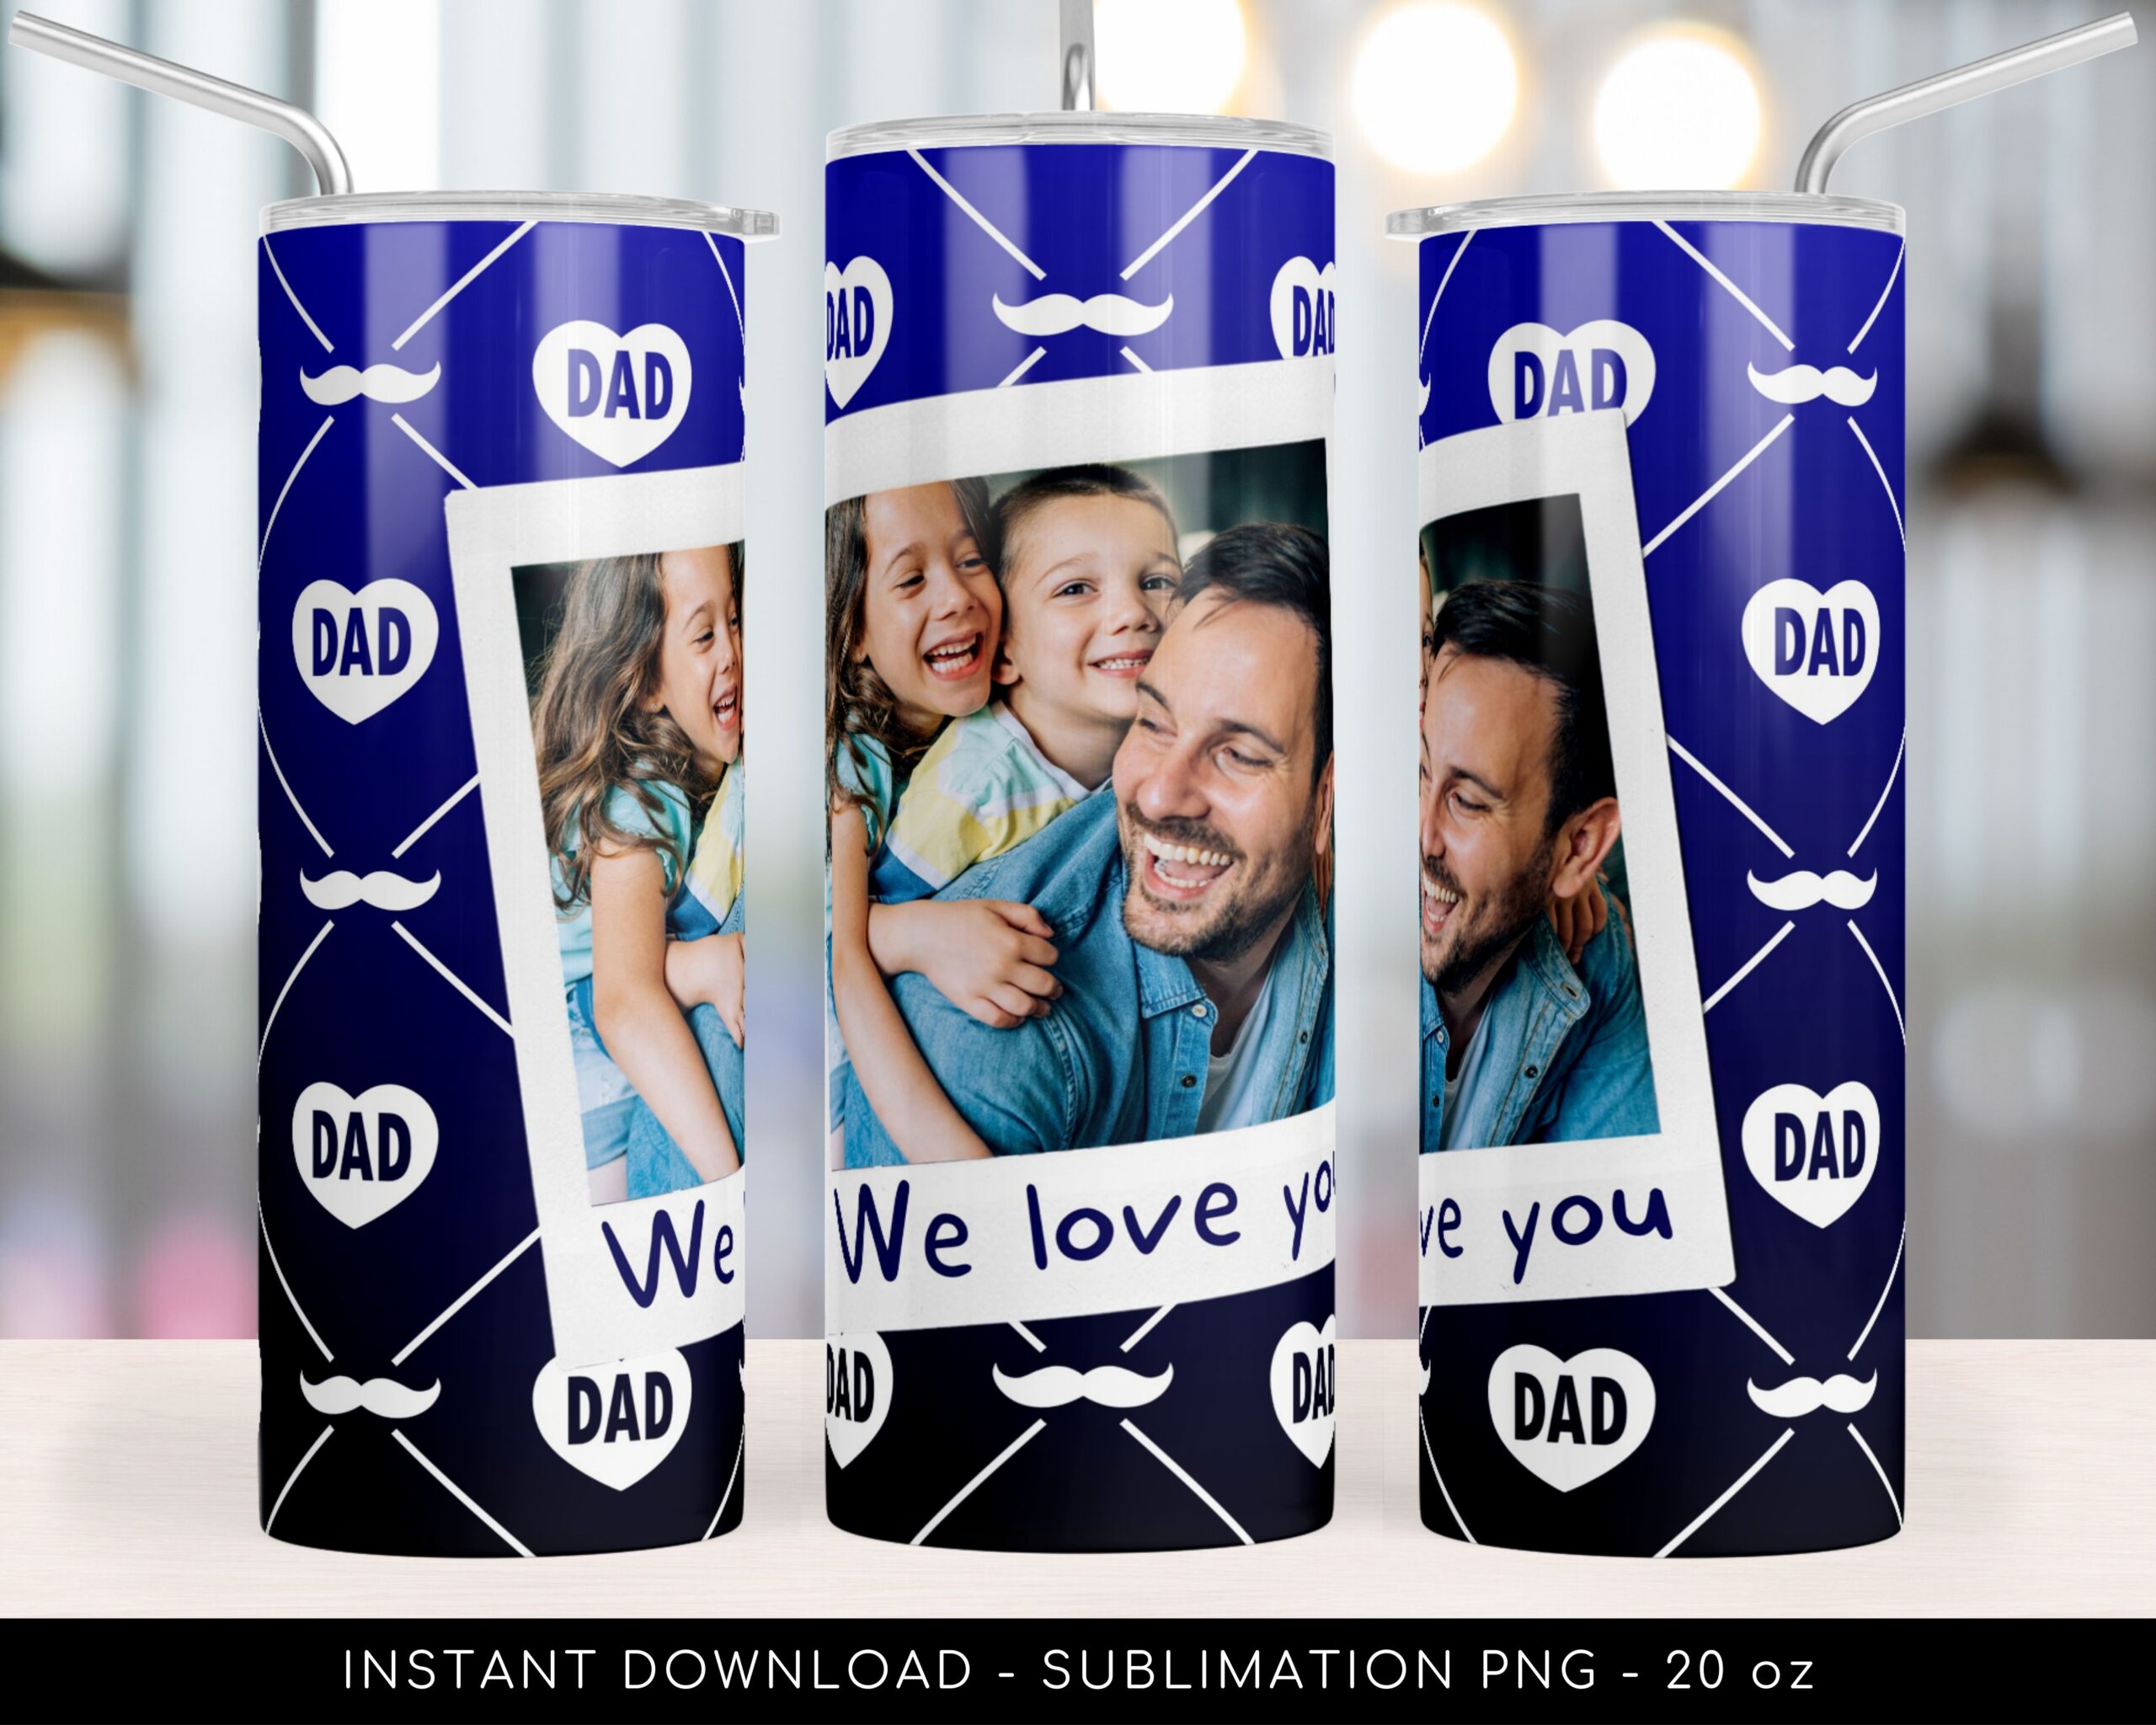 Custom Photo Tumbler PNG File for Sublimation. Dad Tumbler Wrap PNG File, Blue Pattern, Add Your Own Photos, 20 oz Skinny. Instant Download